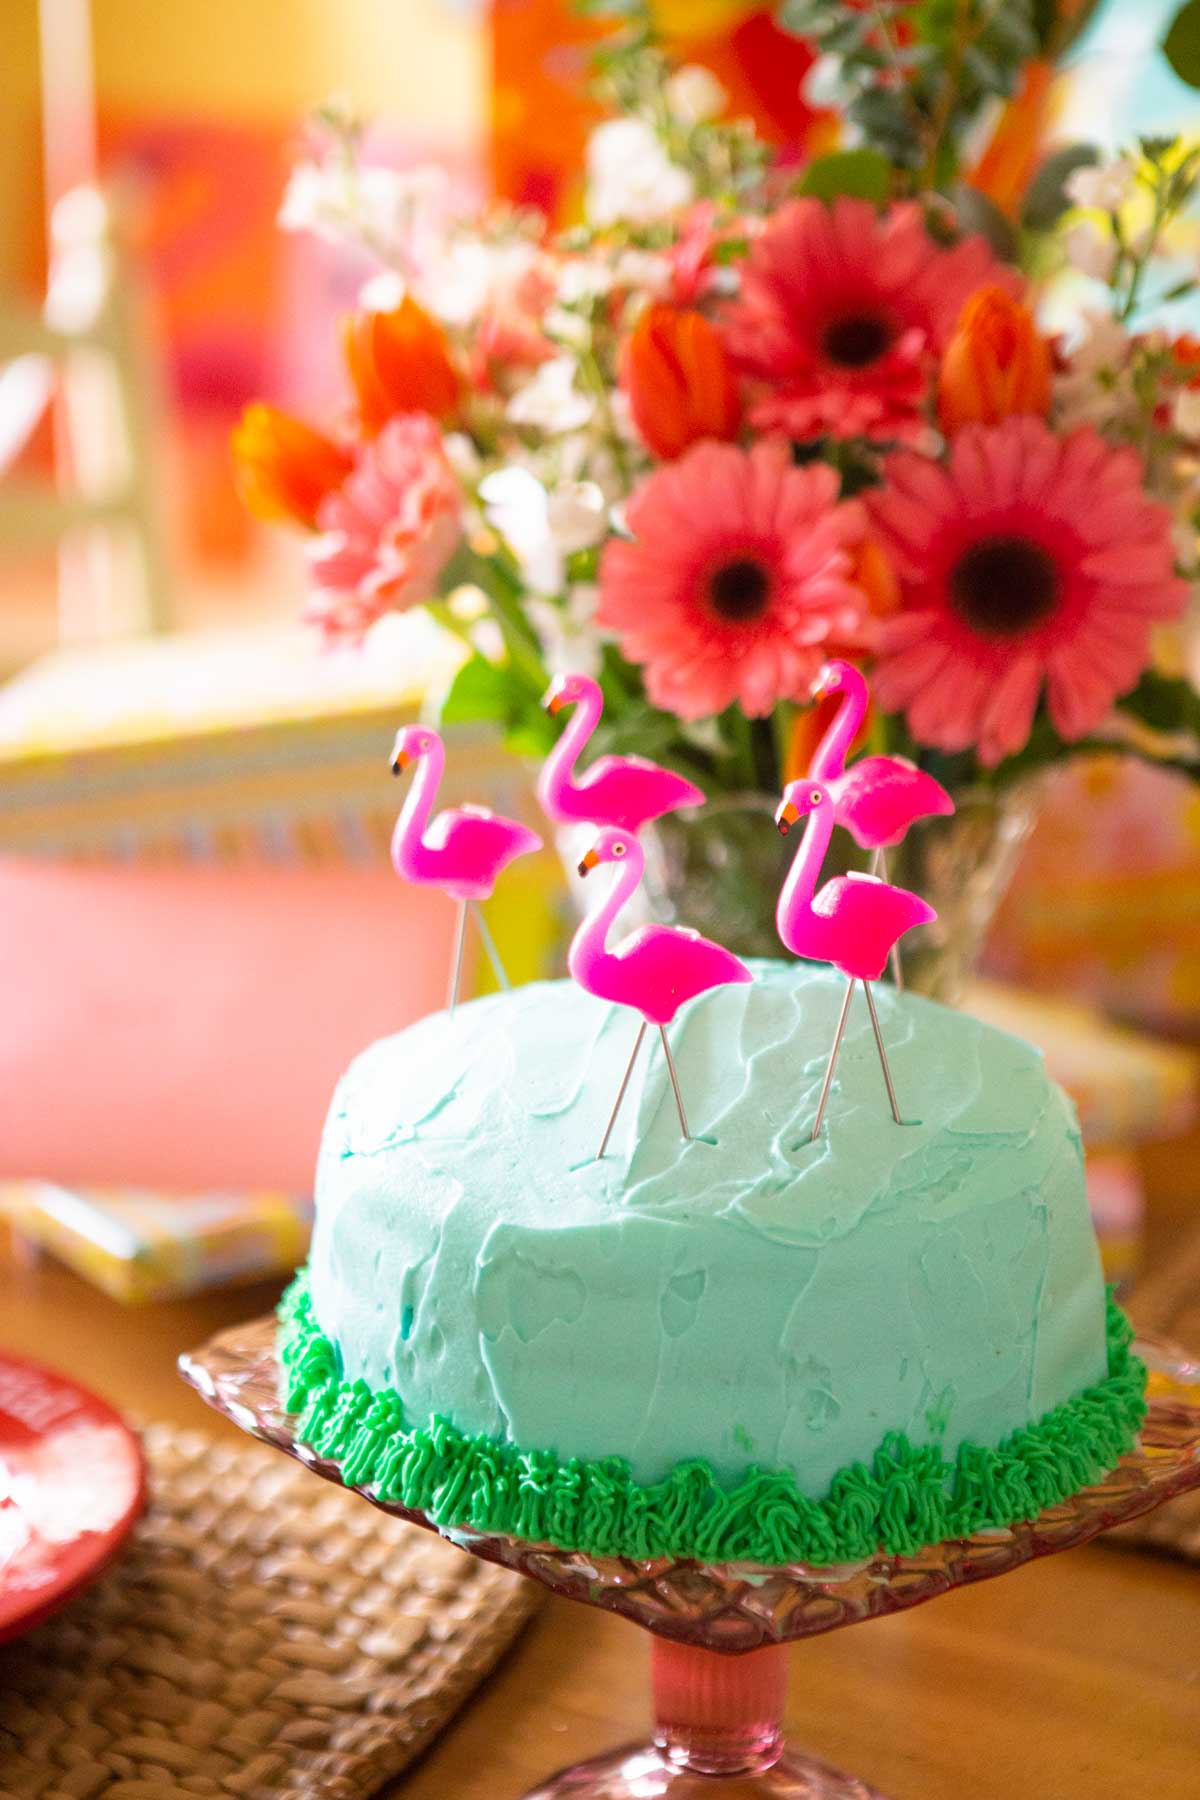 A flamingo cake on a pink cake plate with flowers in the background.